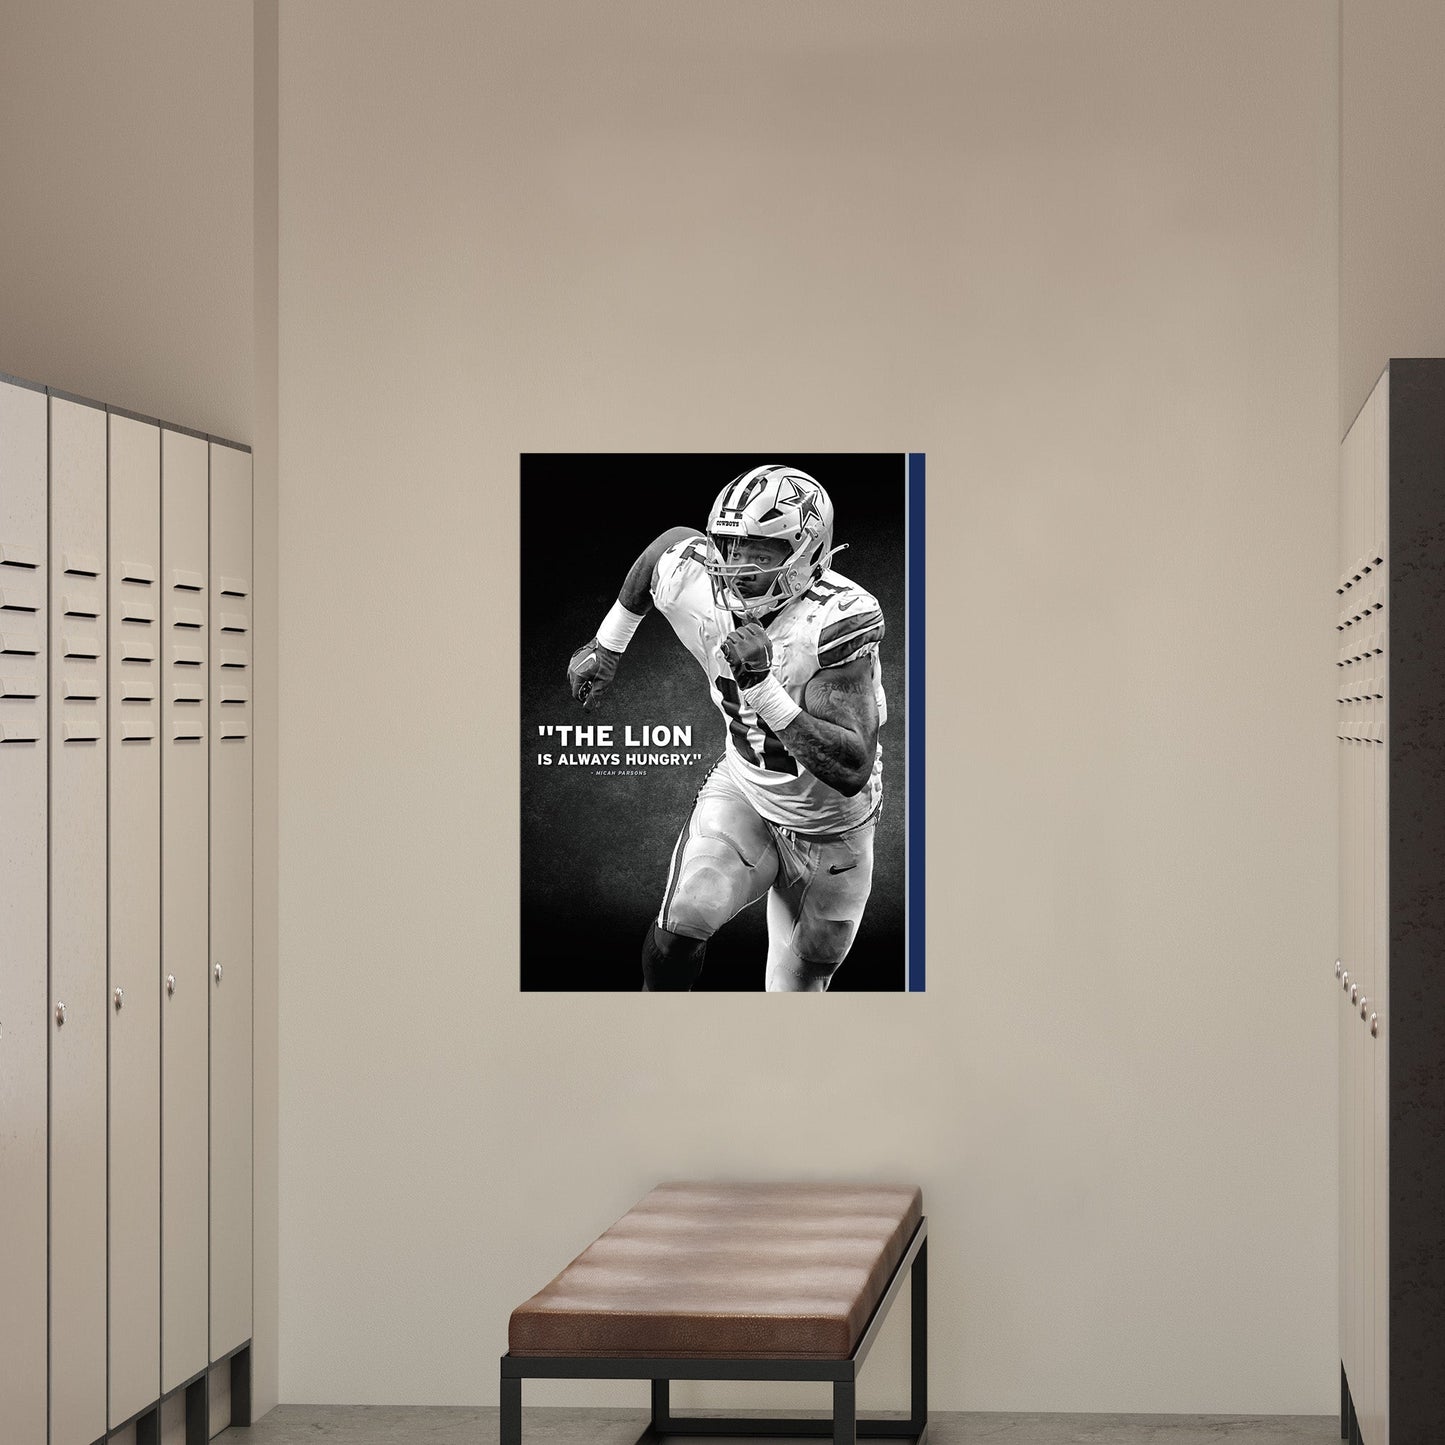 Dallas Cowboys: Micah Parsons Inspirational Poster - Officially Licensed NFL Removable Adhesive Decal